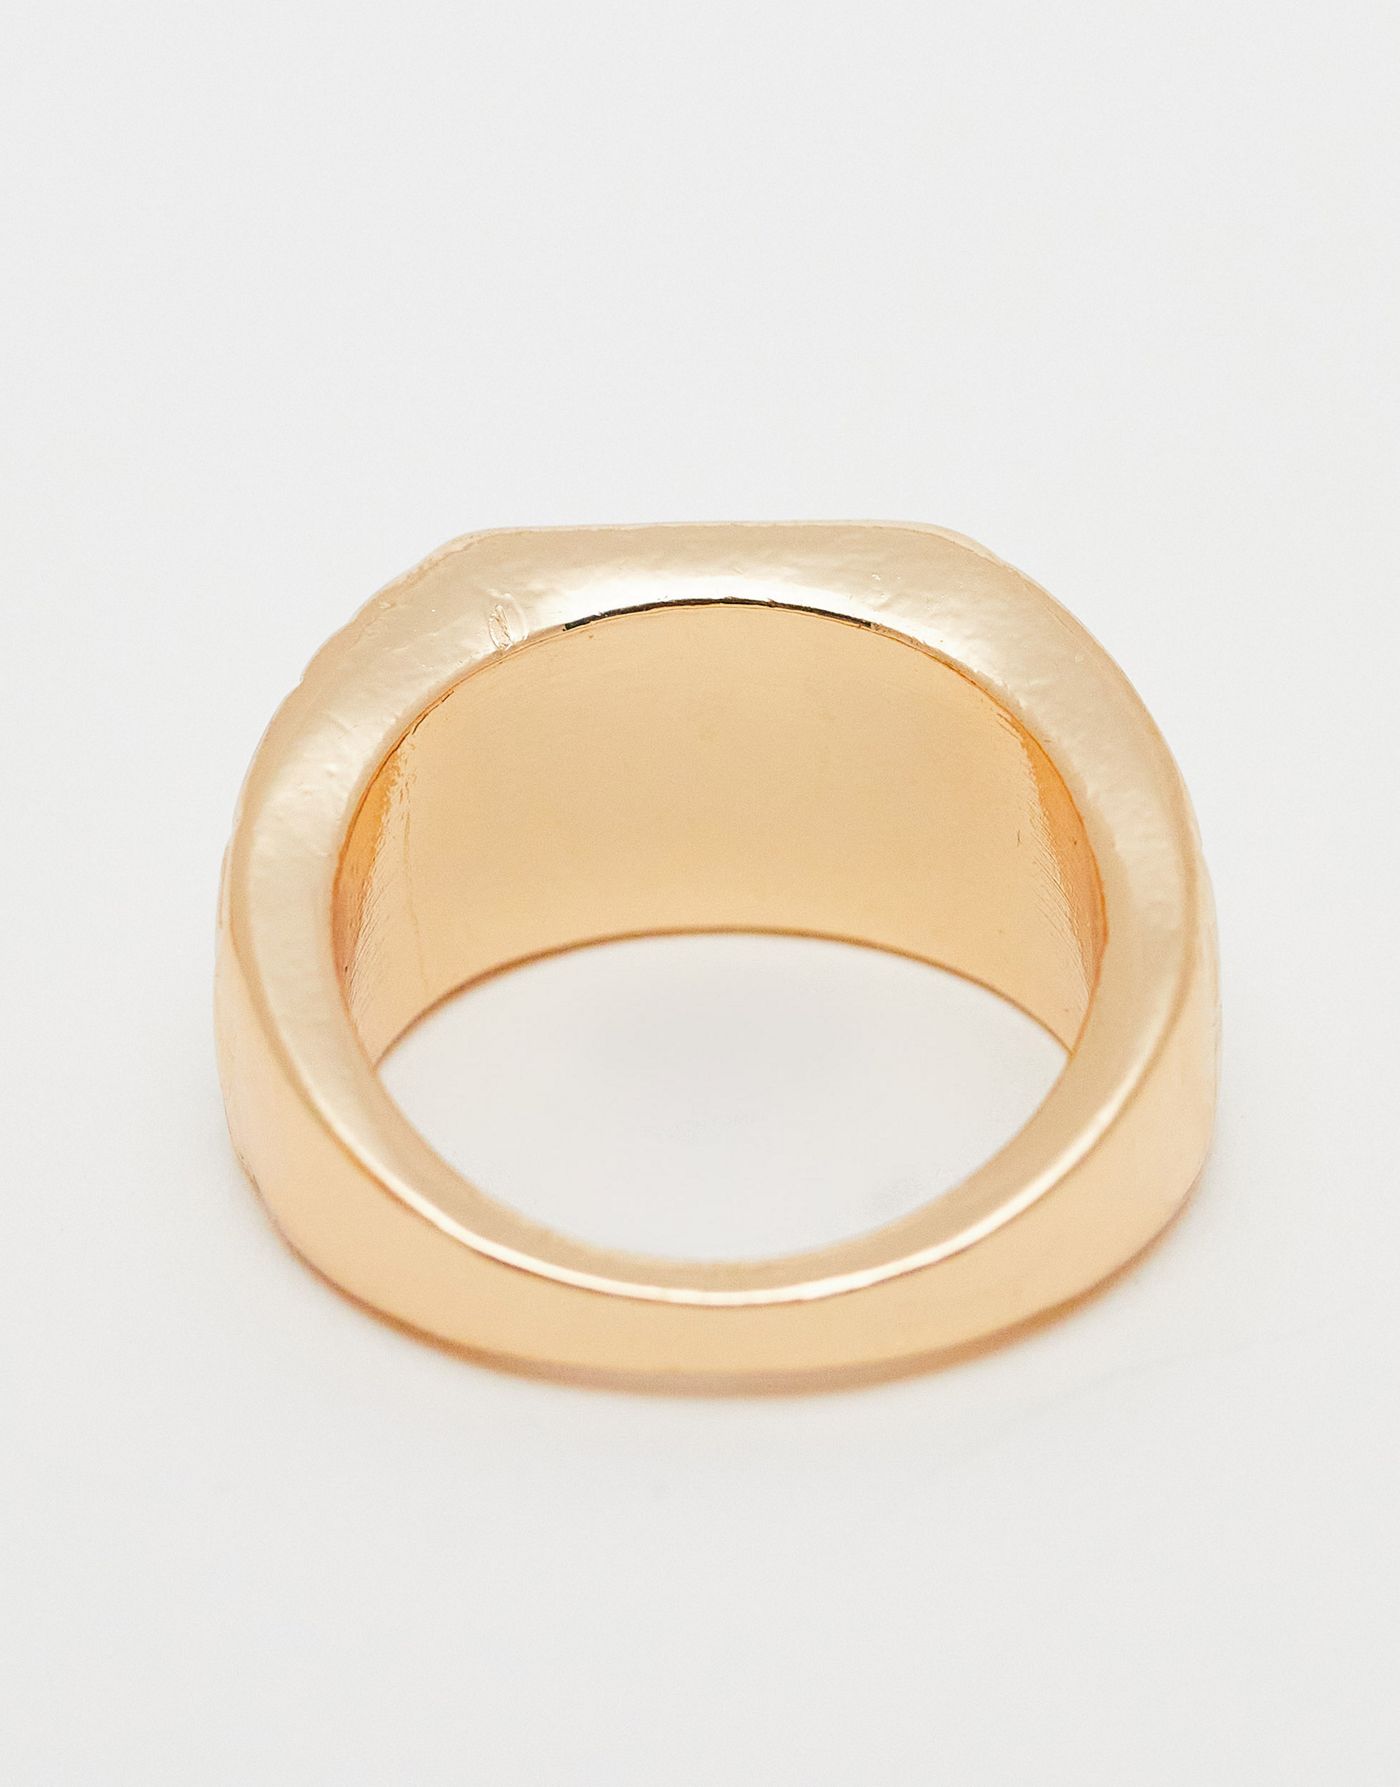 ASOS DESIGN 5 pack signet ring set with black stone detail in gold tone